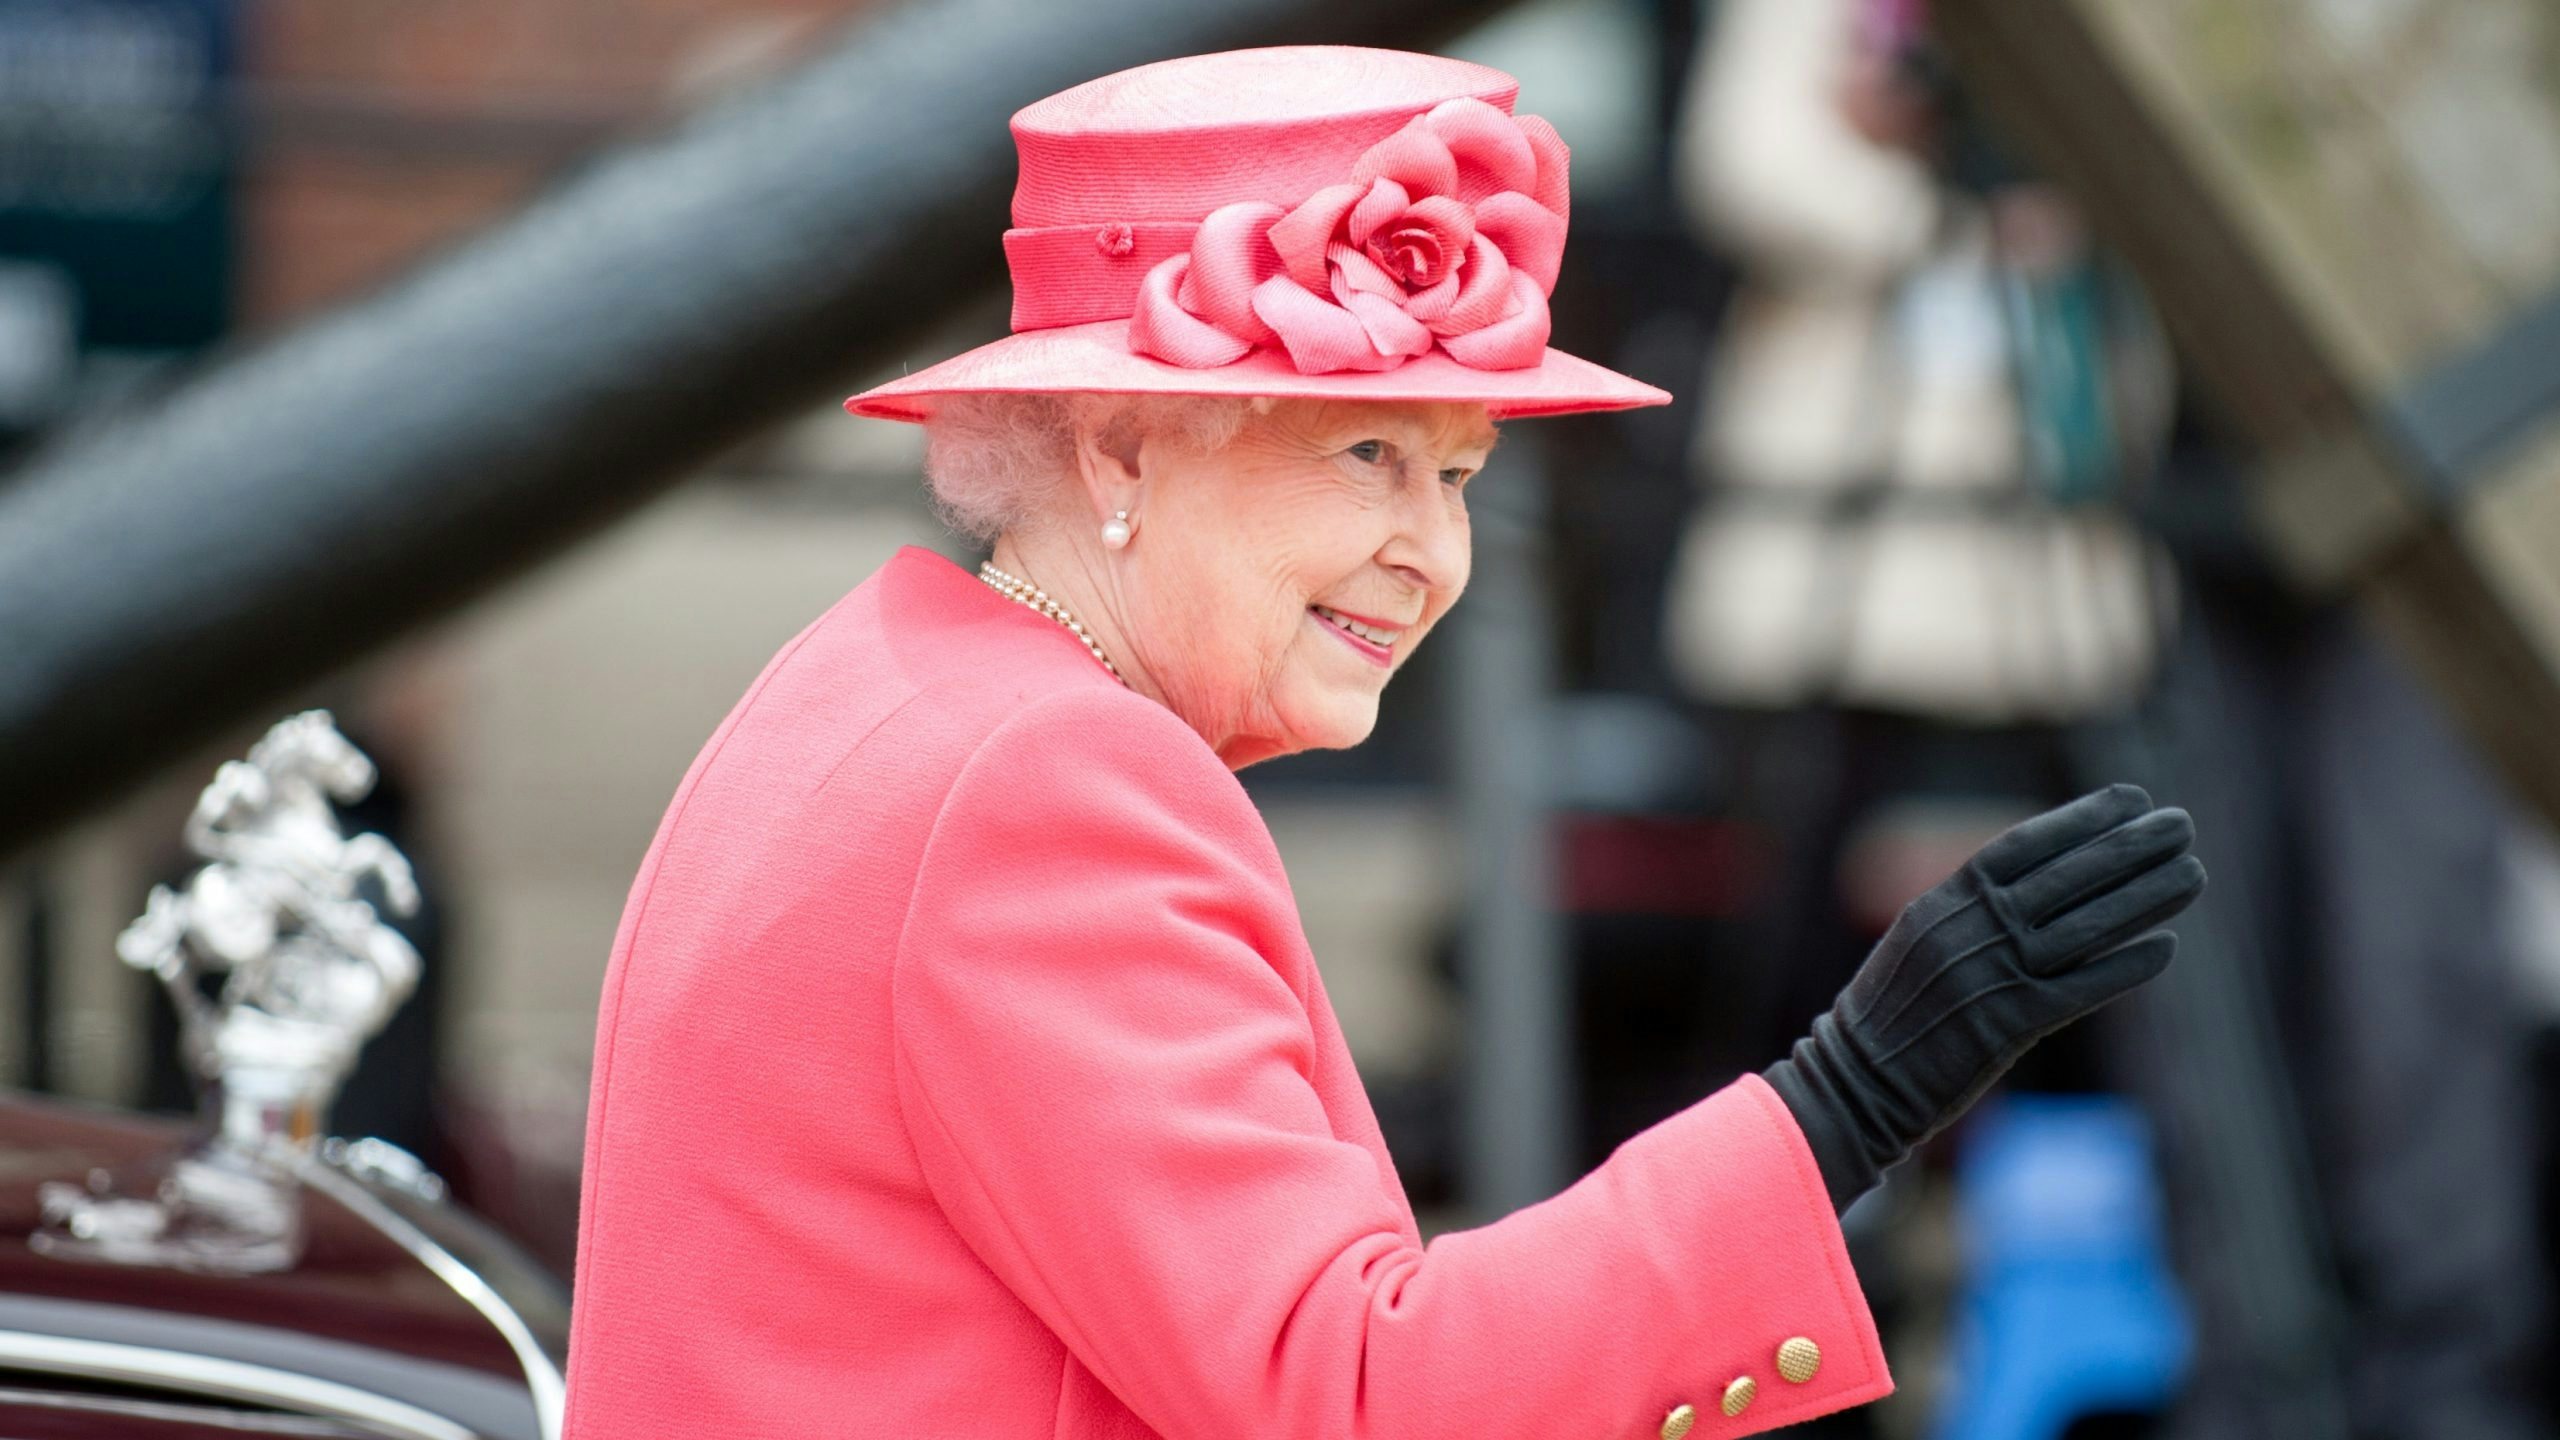 Britain’s longest-reigning monarch has passed away at the age of 96. Here, we look at her impact on China and the implications for future relations. Photo: Shutterstock